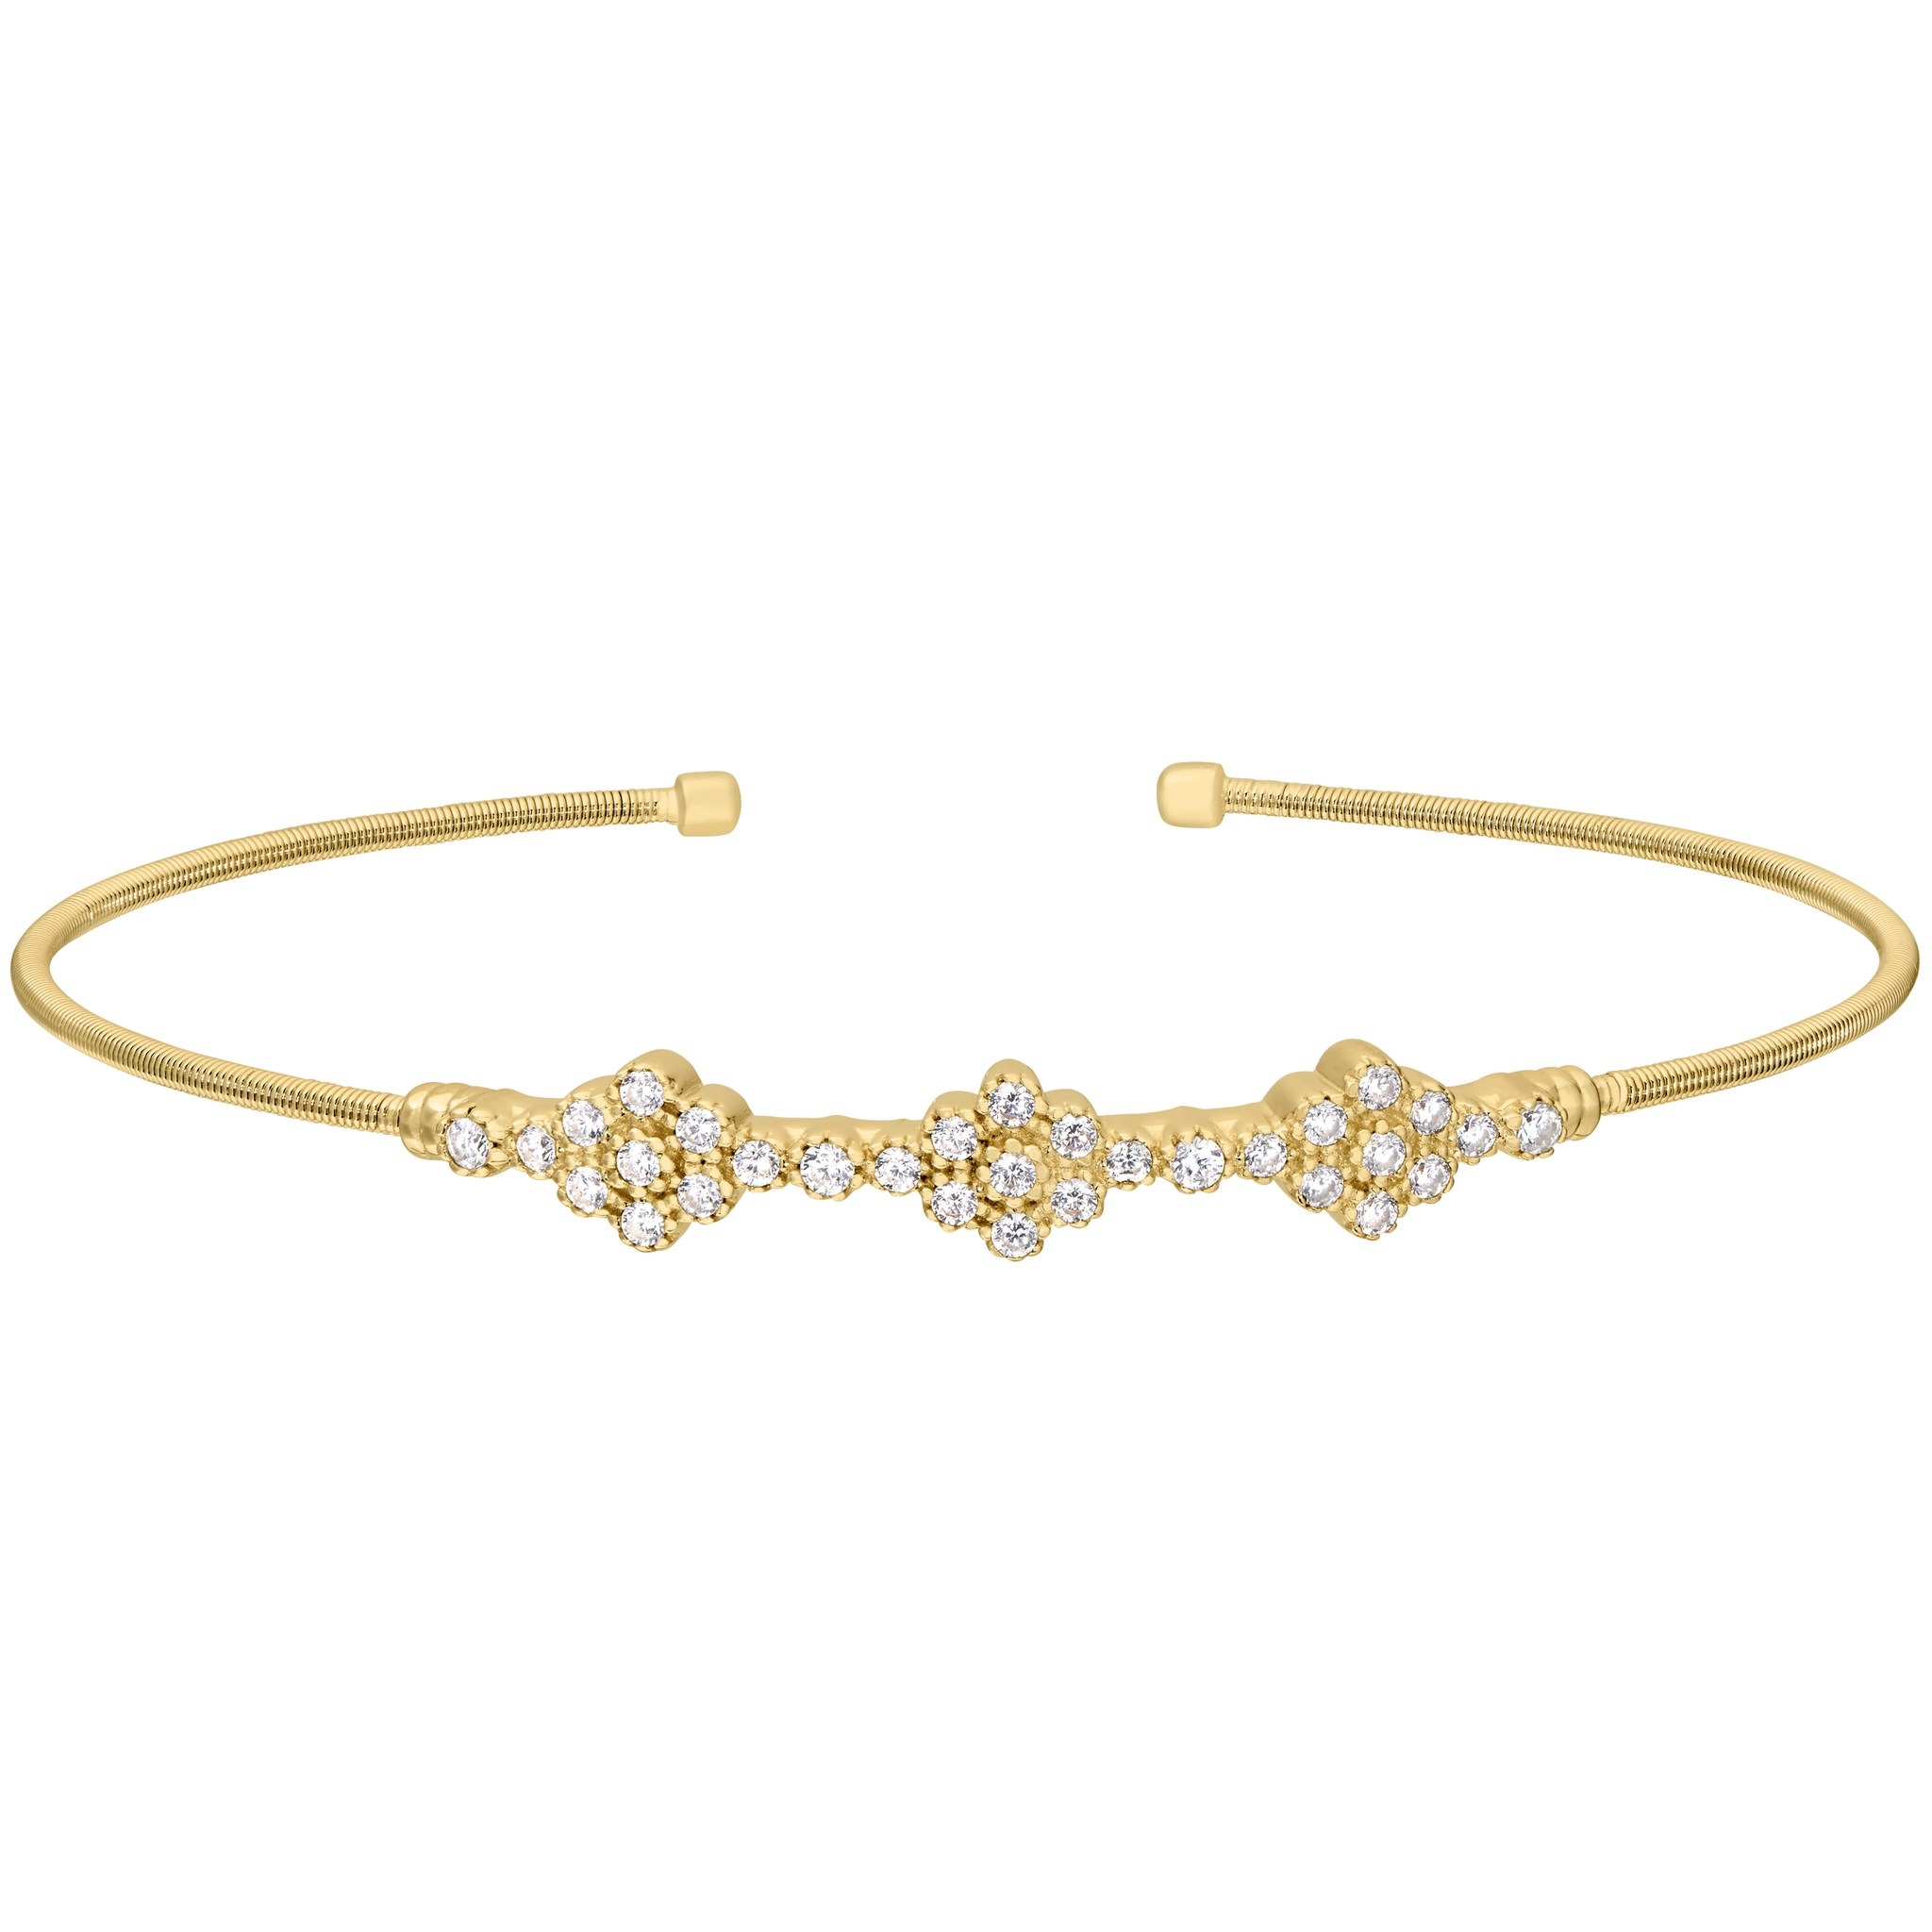 Gold Finish Sterling Silver Cable Cuff Bracelet w/Three Clusters of Simulated Diamonds